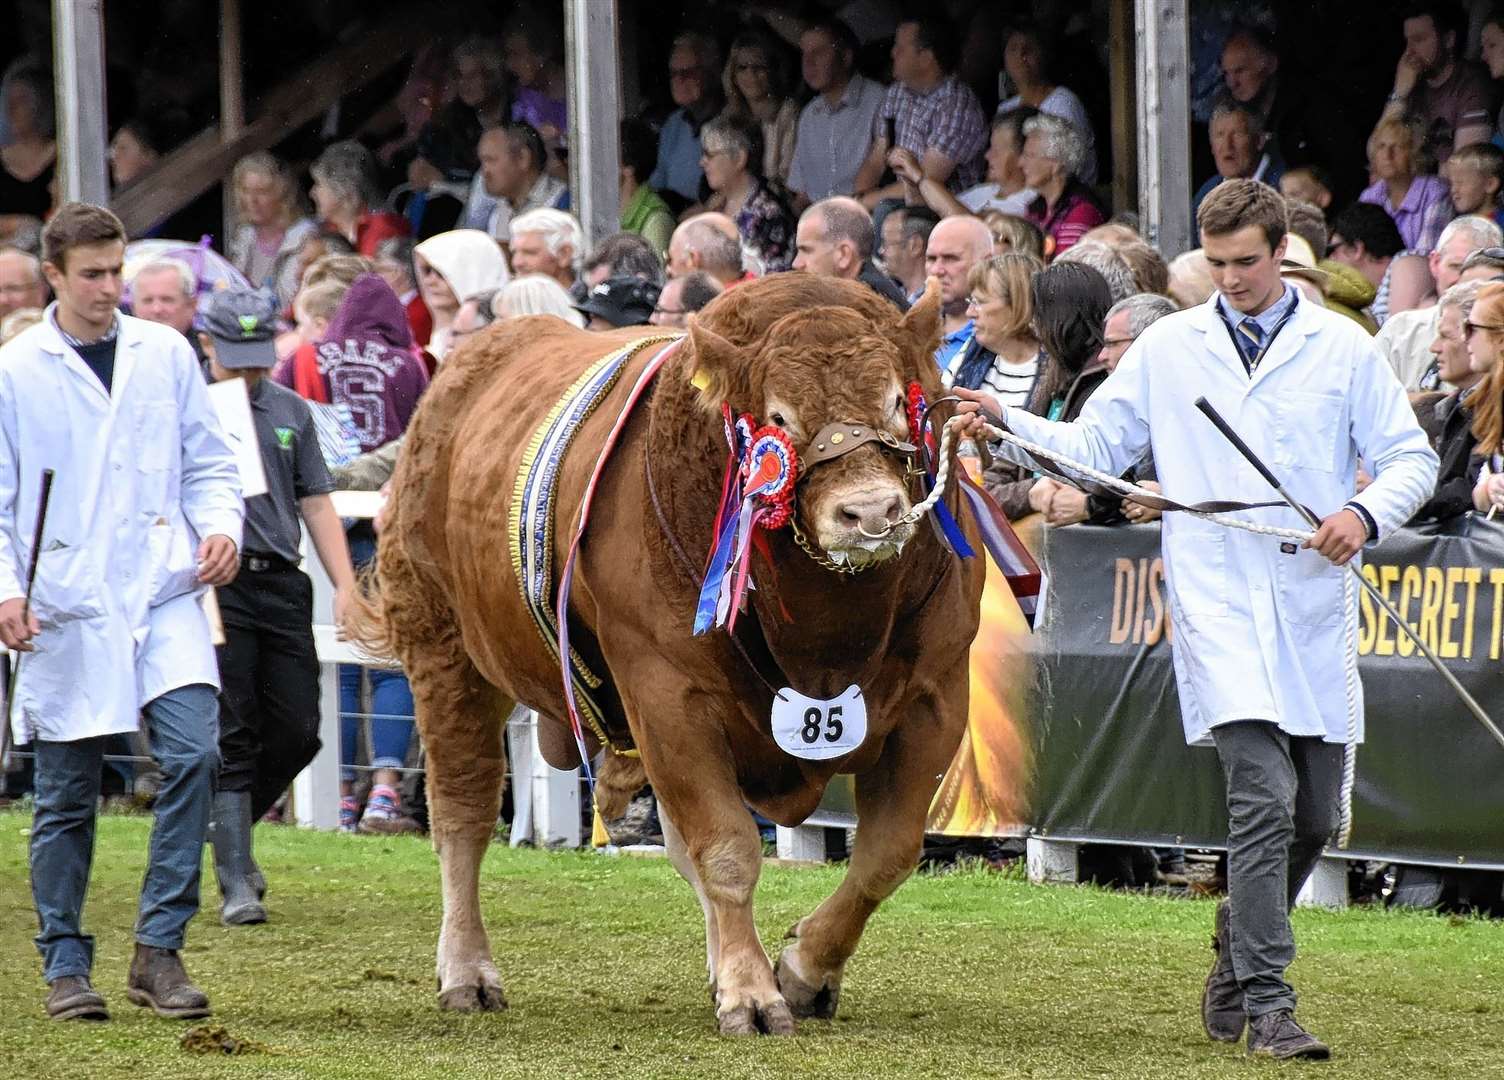 Turriff Show, the largest two-day agricultural show in Scotland, will return at the end of July.